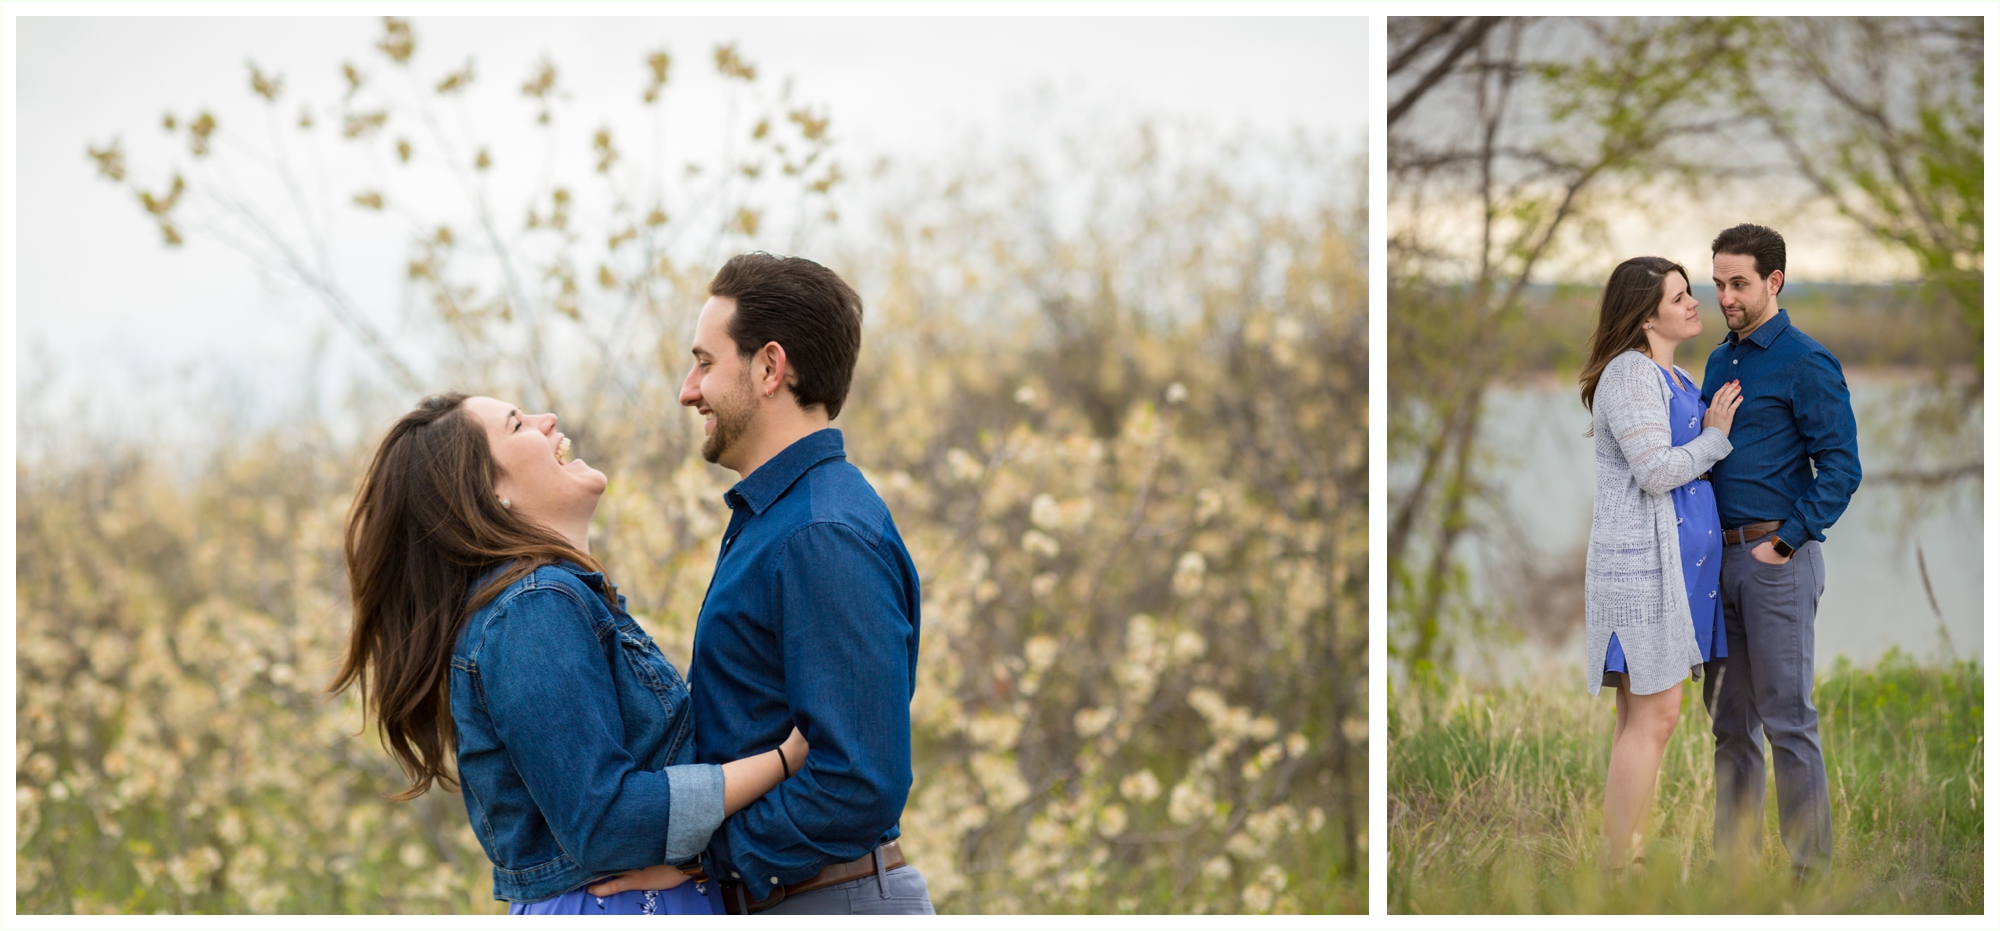 denver engagement photographer shoots spring Colorado session at Cherry Creek Reservoir. Foggy springy engagement session by Colorado engagement photographer Kathryn Kim. couple wears blue and grey engagement outfits